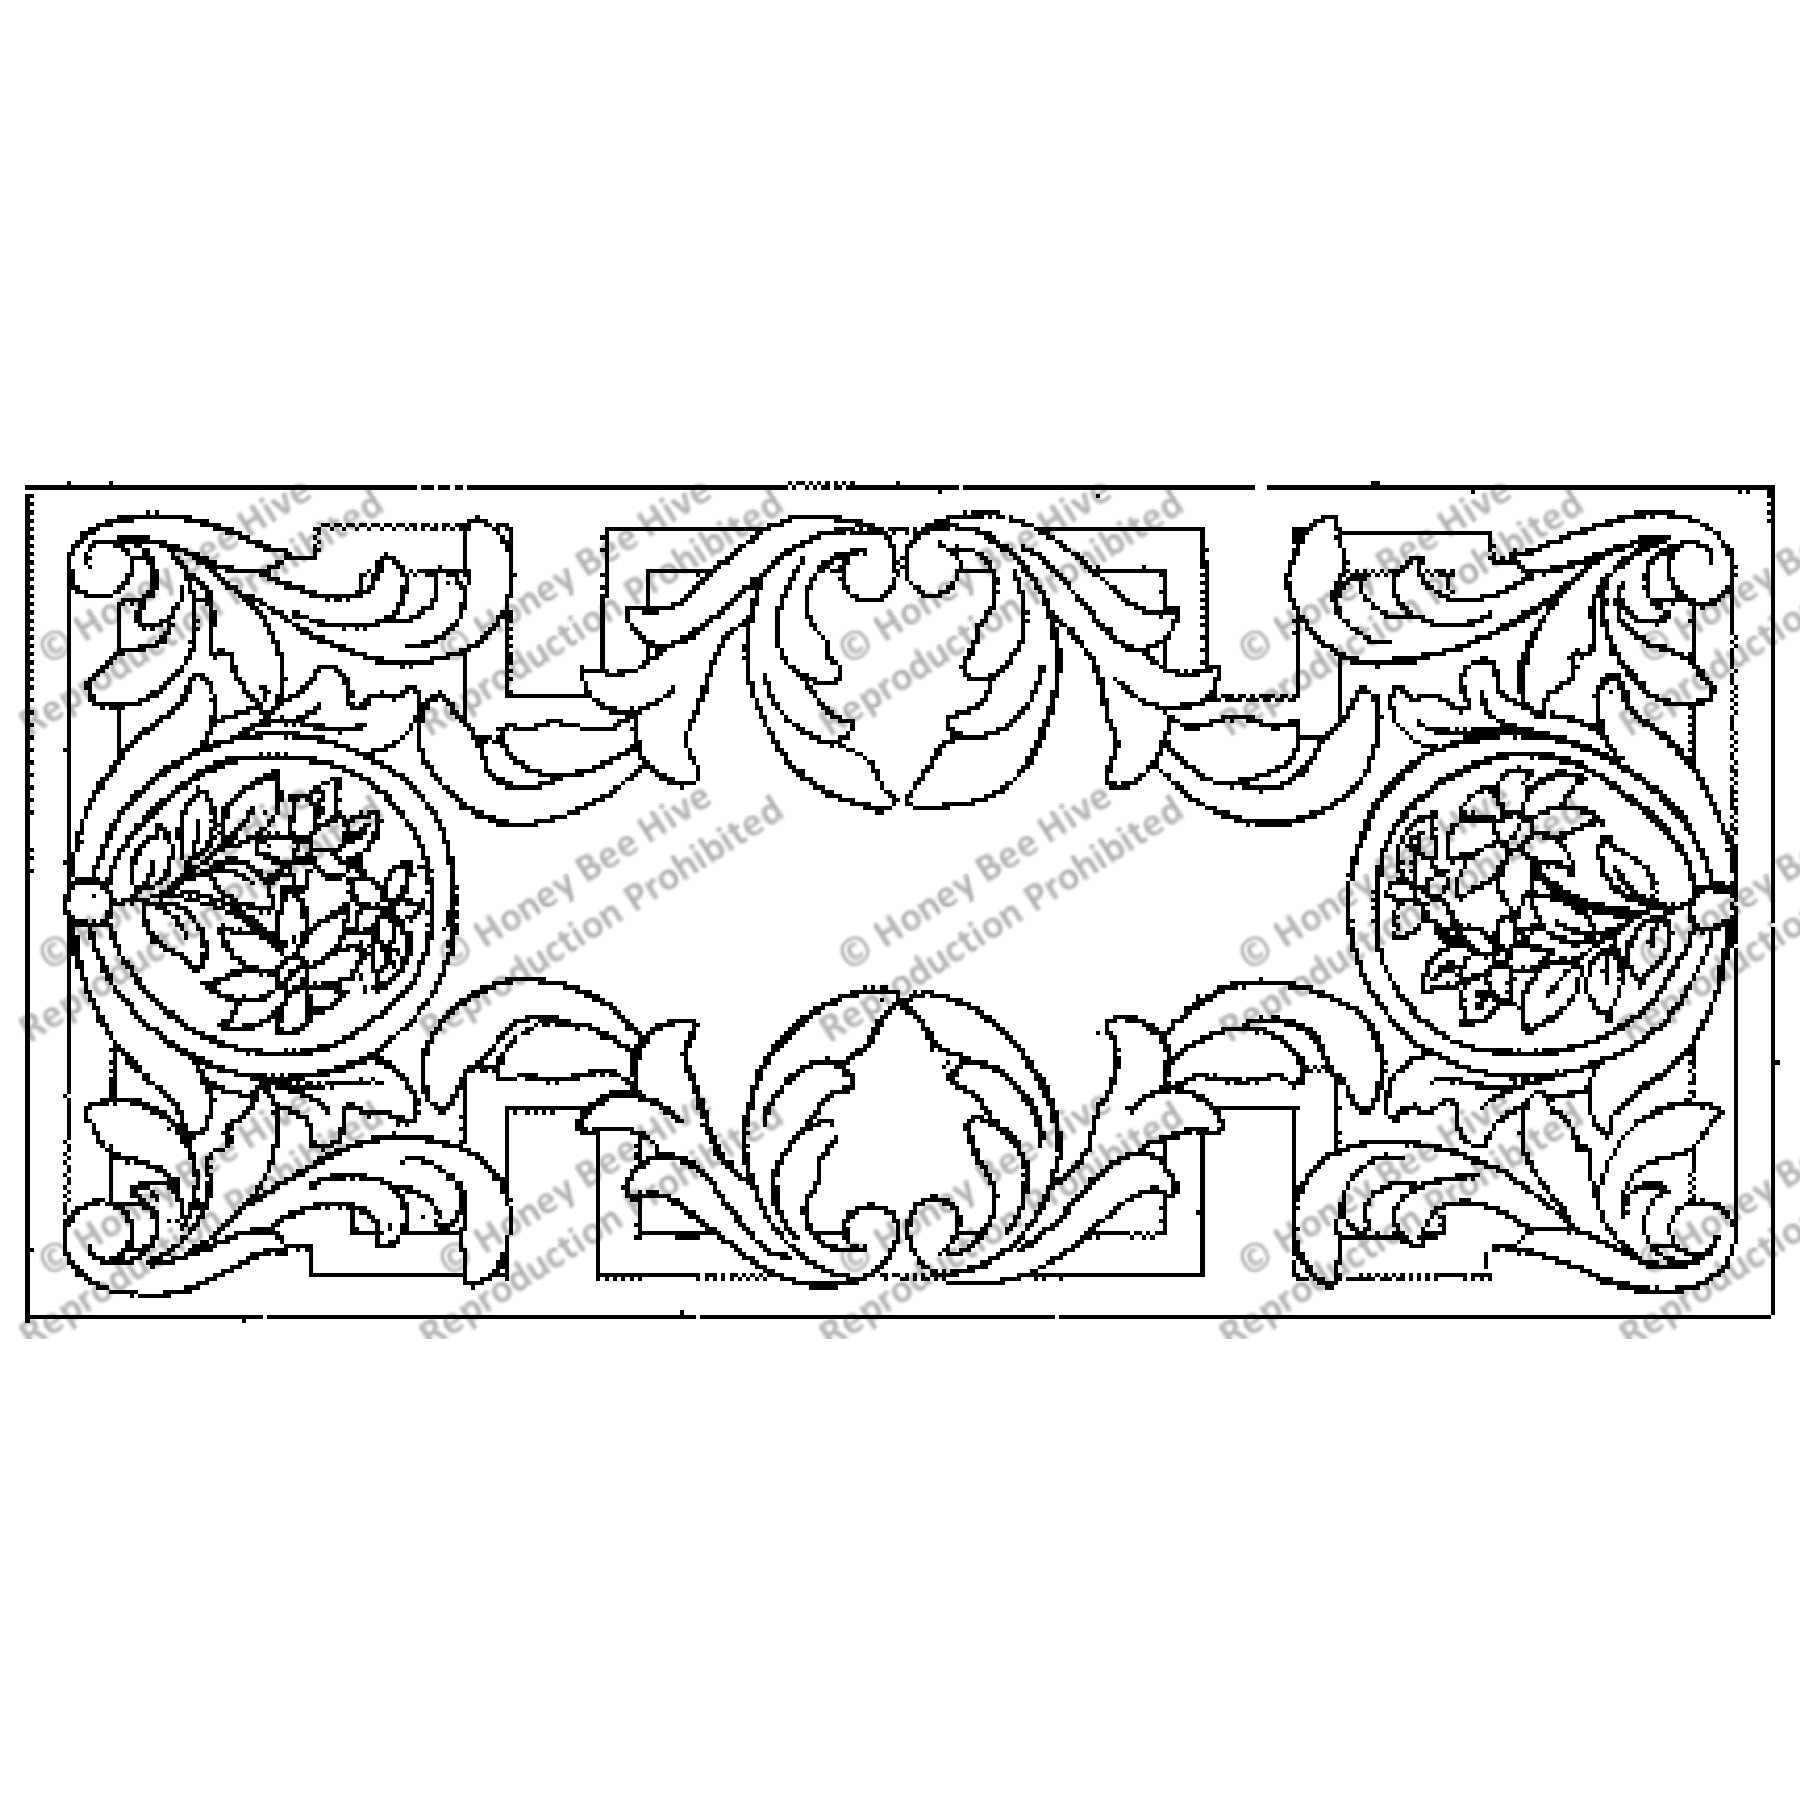 Aubusson Bench, rug hooking pattern